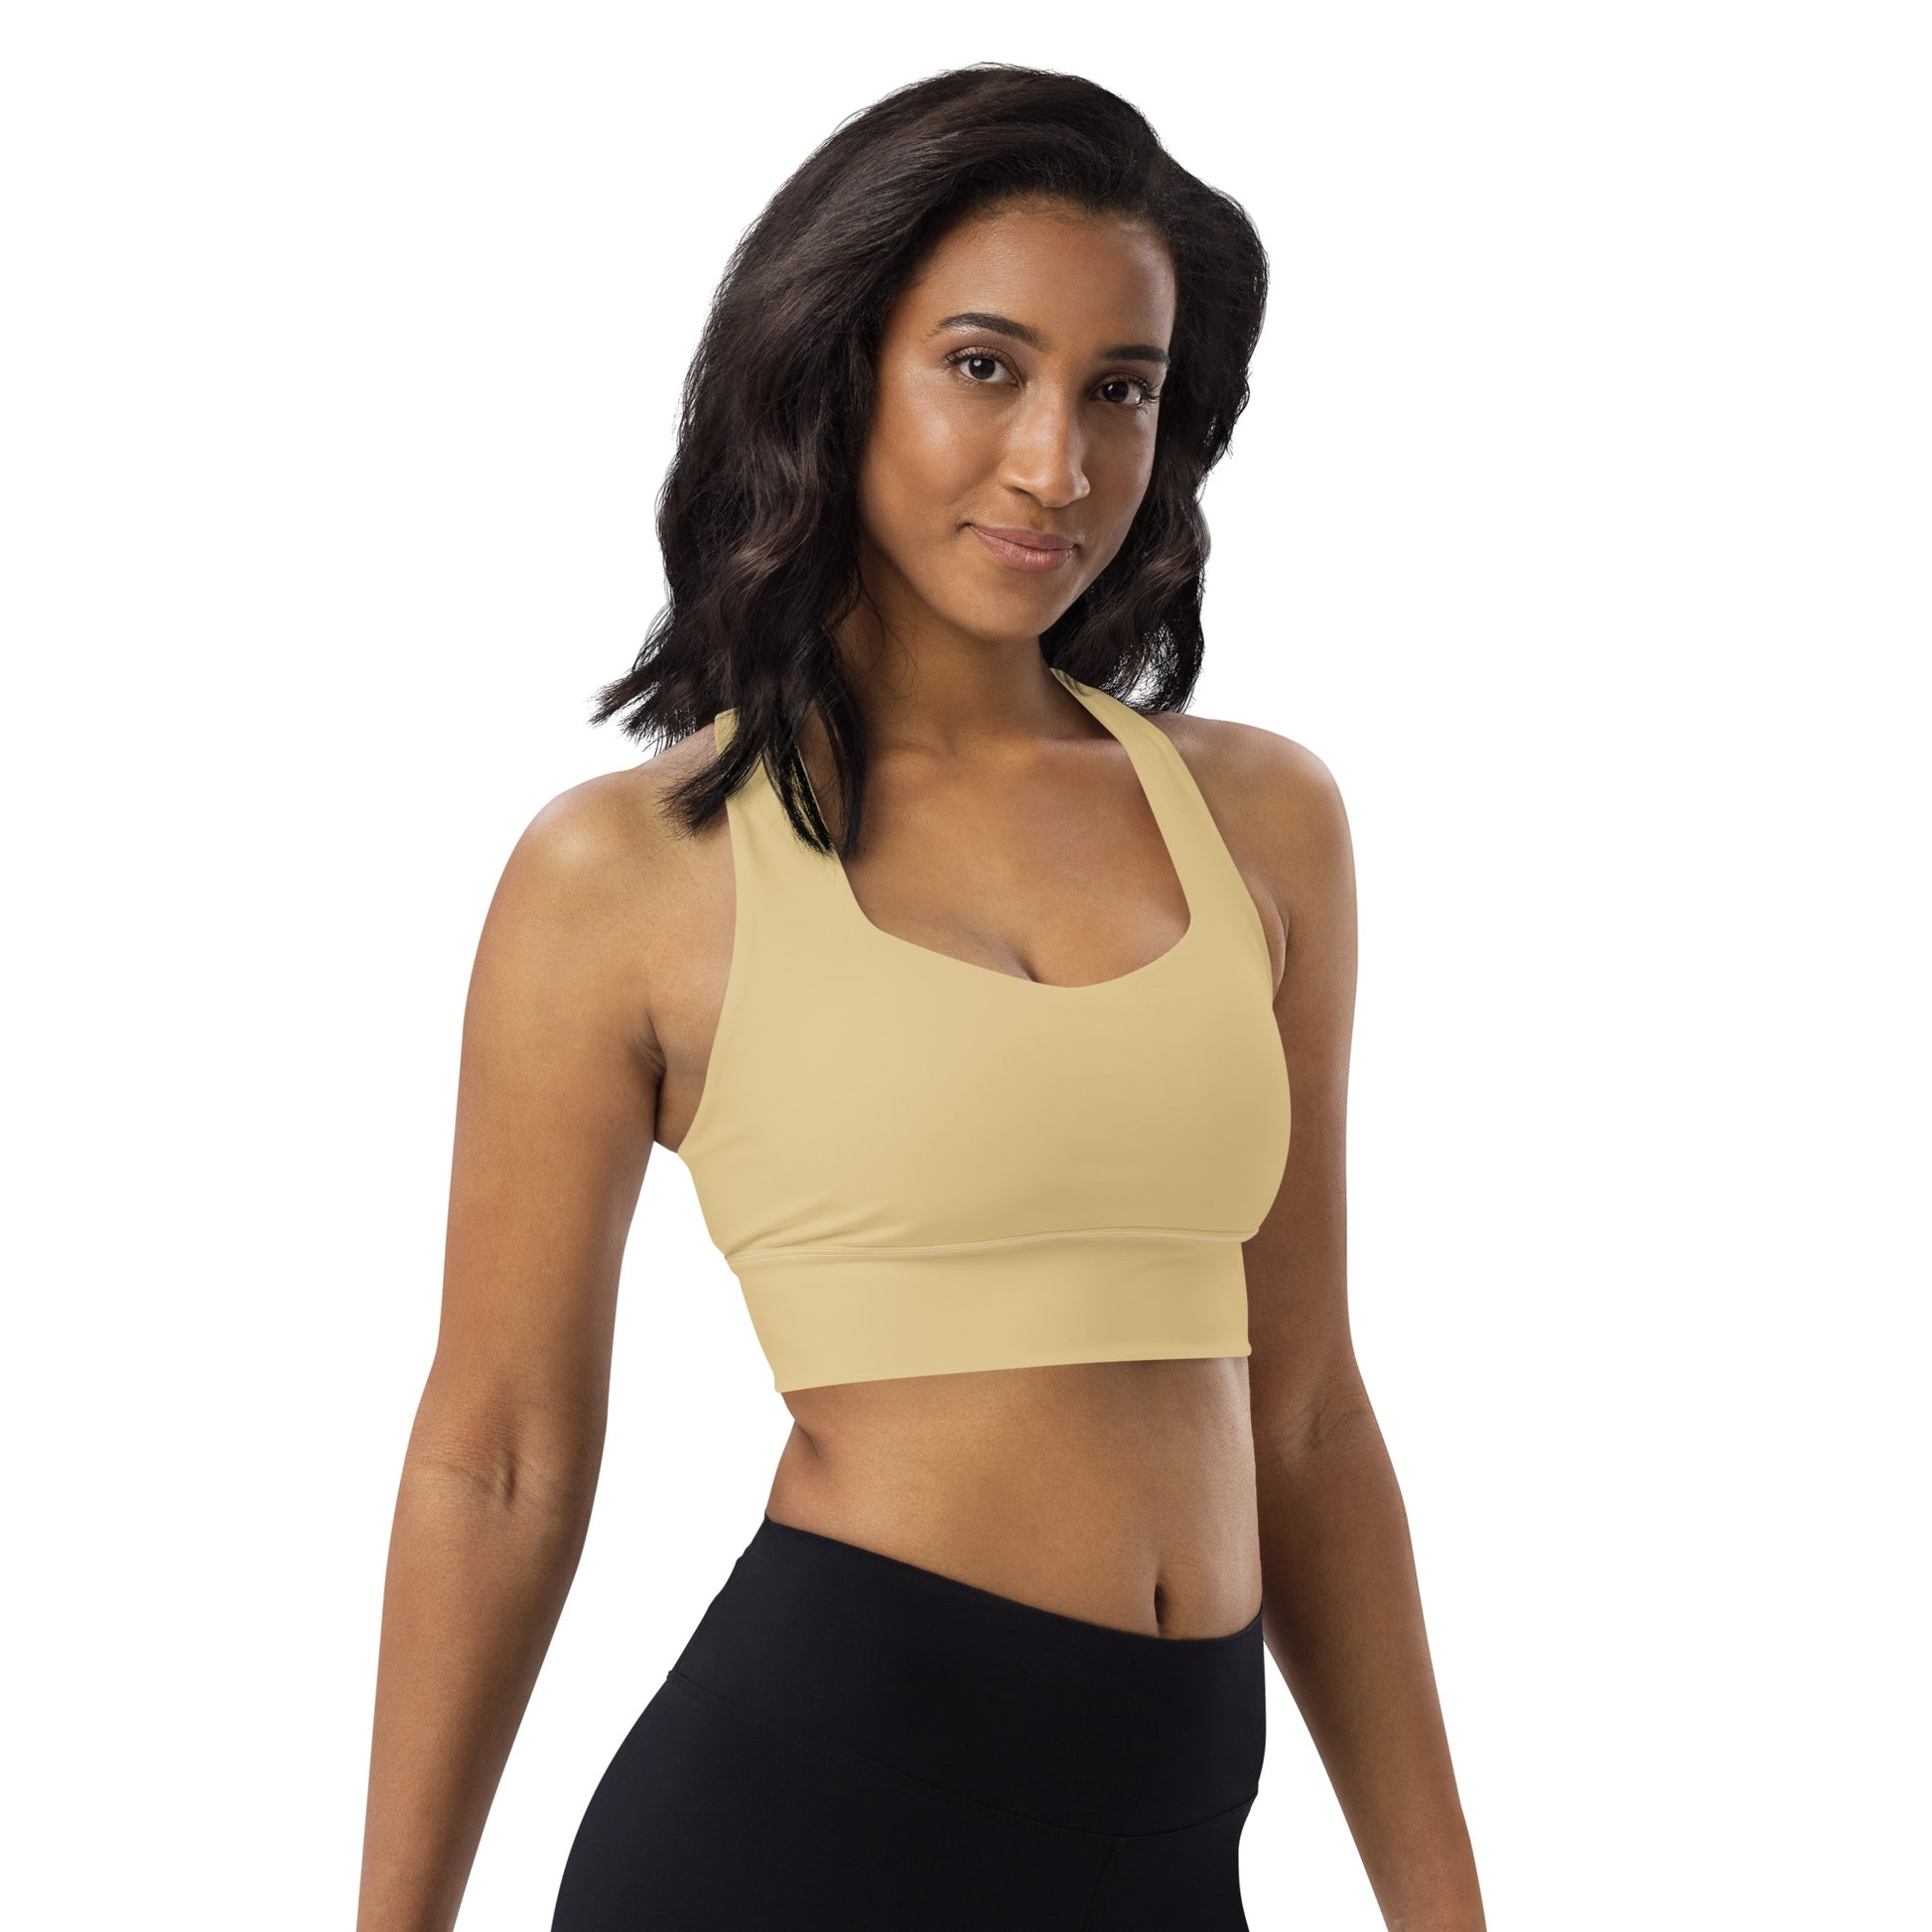  New Orleans Longline Women's High Impact Sports Bra by Long-line Women's High Impact Sports Bra sold by Jain Yoga